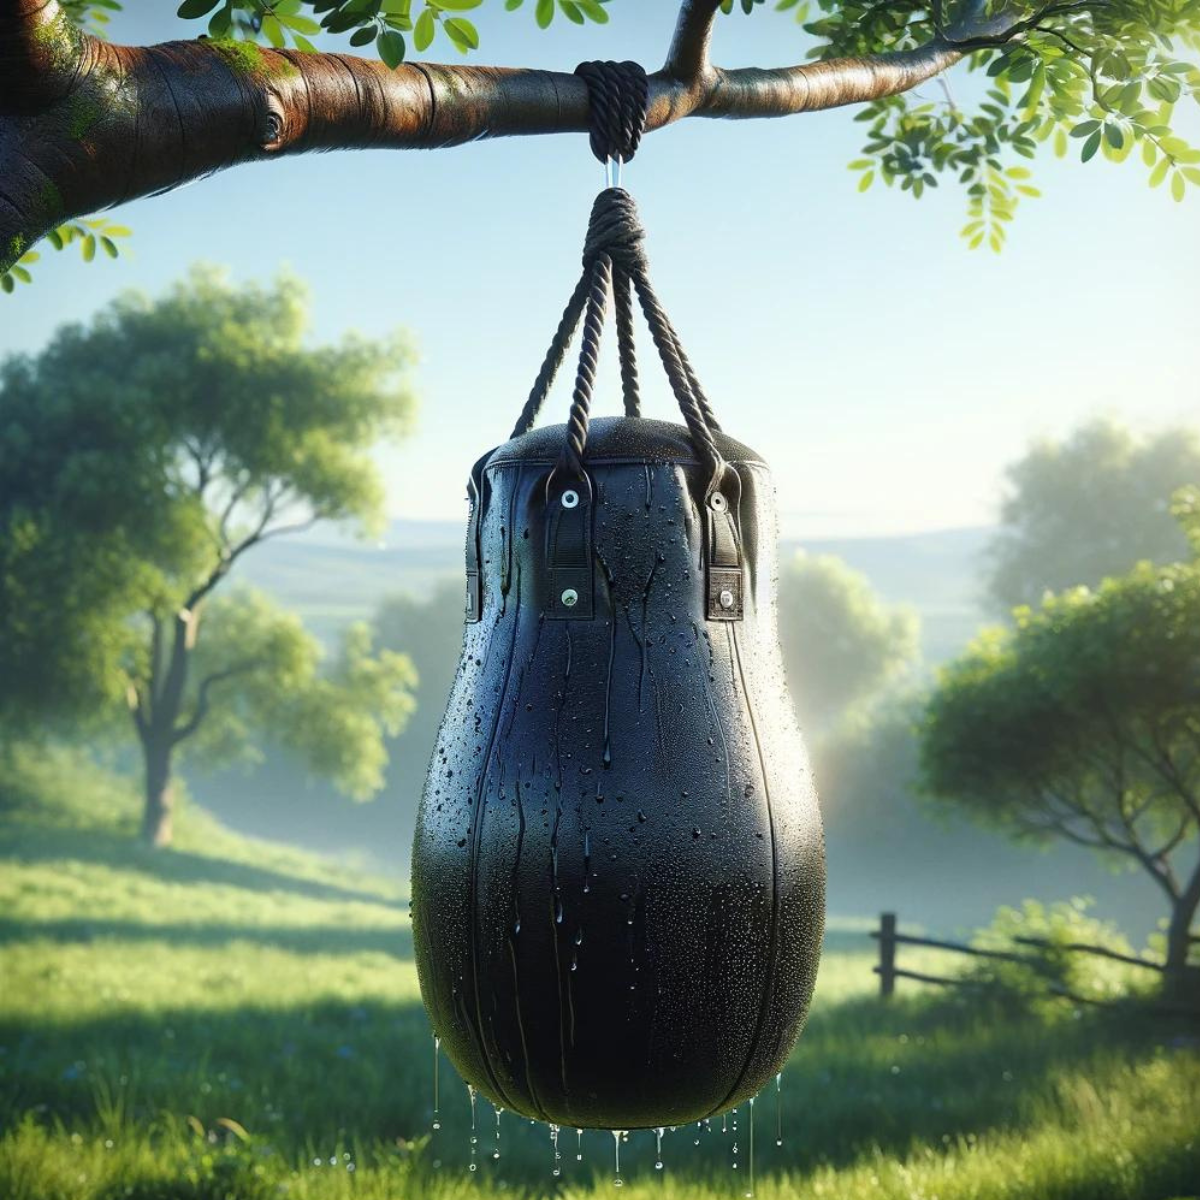 Best Punch Bags For The UK - A Complete Guide To Choosing The Correct Bag For Outdoors & Gardens